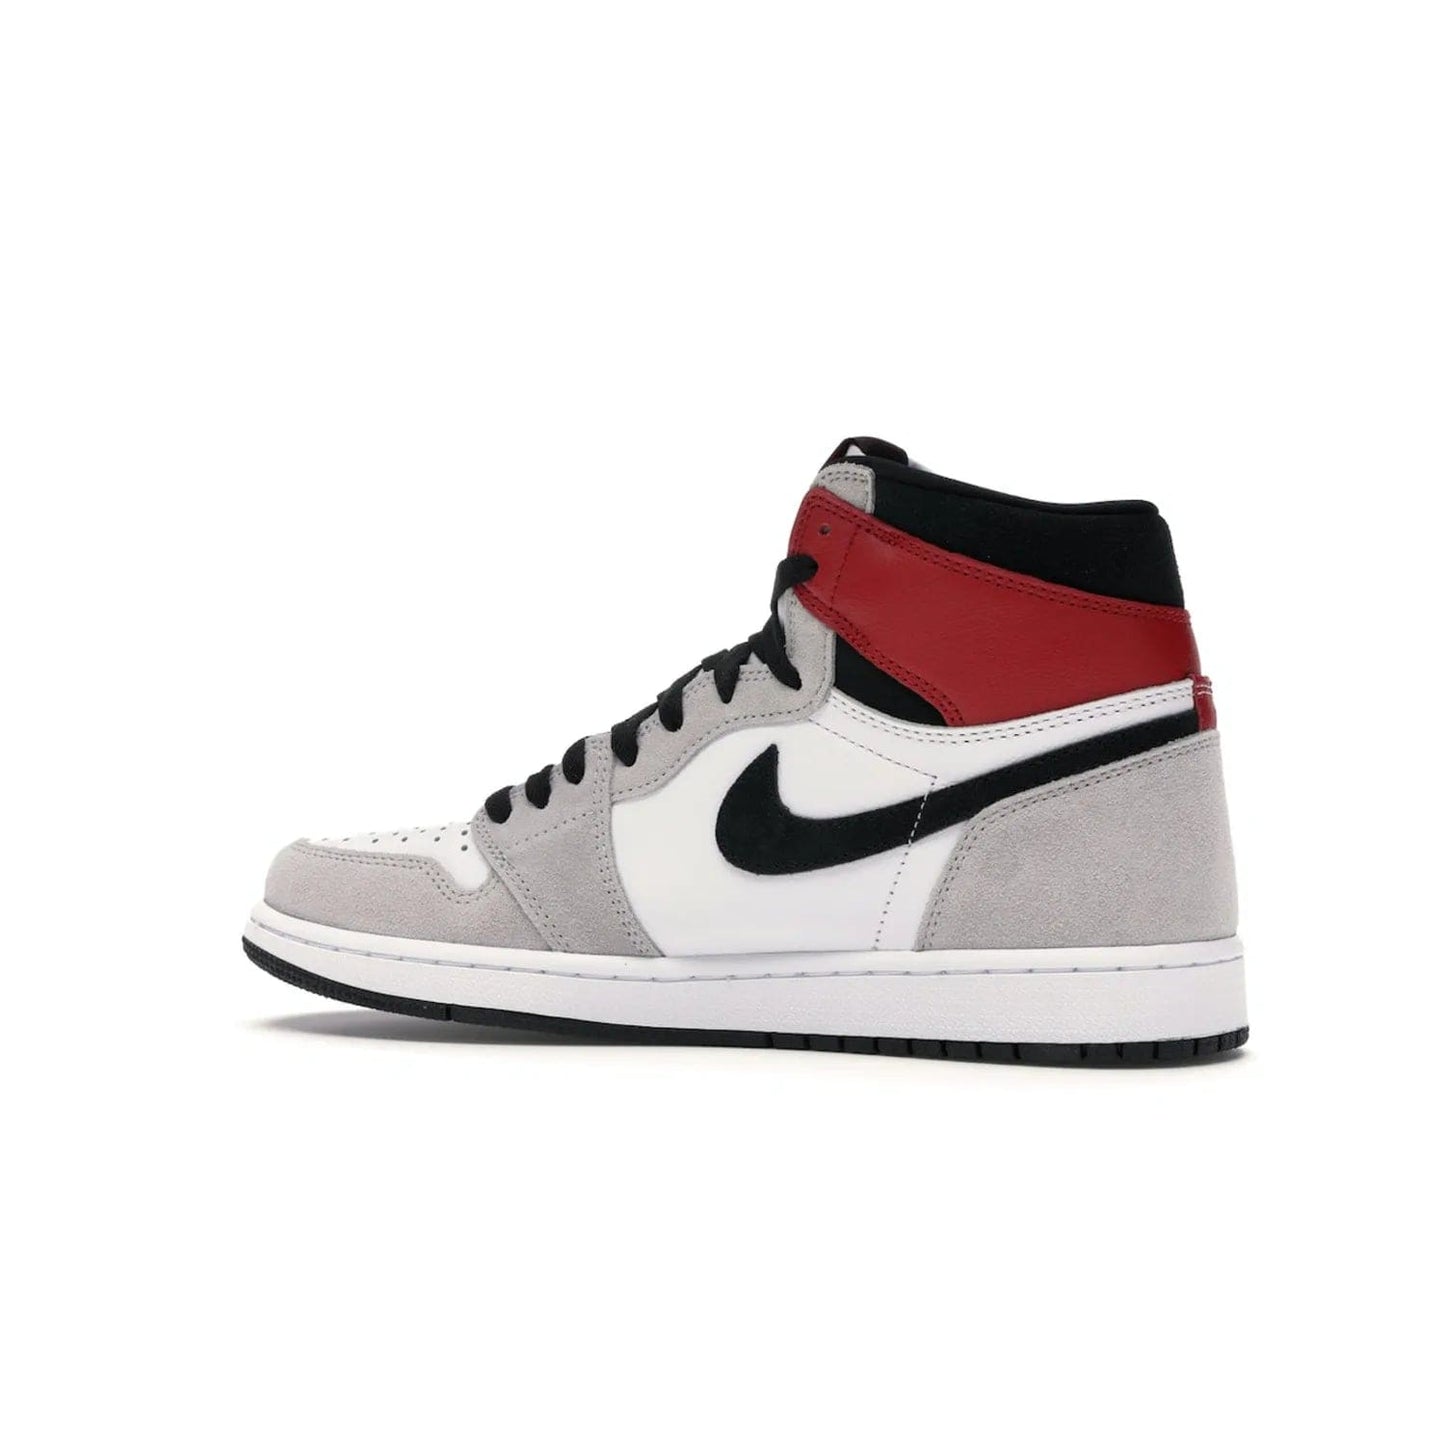 Jordan 1 Retro High Light Smoke Grey - Image 21 - Only at www.BallersClubKickz.com - Comfortable and stylish, Jordan 1 Retro High Light Smoke Grey offers a unique spin on a classic design. White leather, grey suede, red leather and black details are set on a white midsole and black outsole. Get the sneaker released in July 2020 and add a twist to your wardrobe.